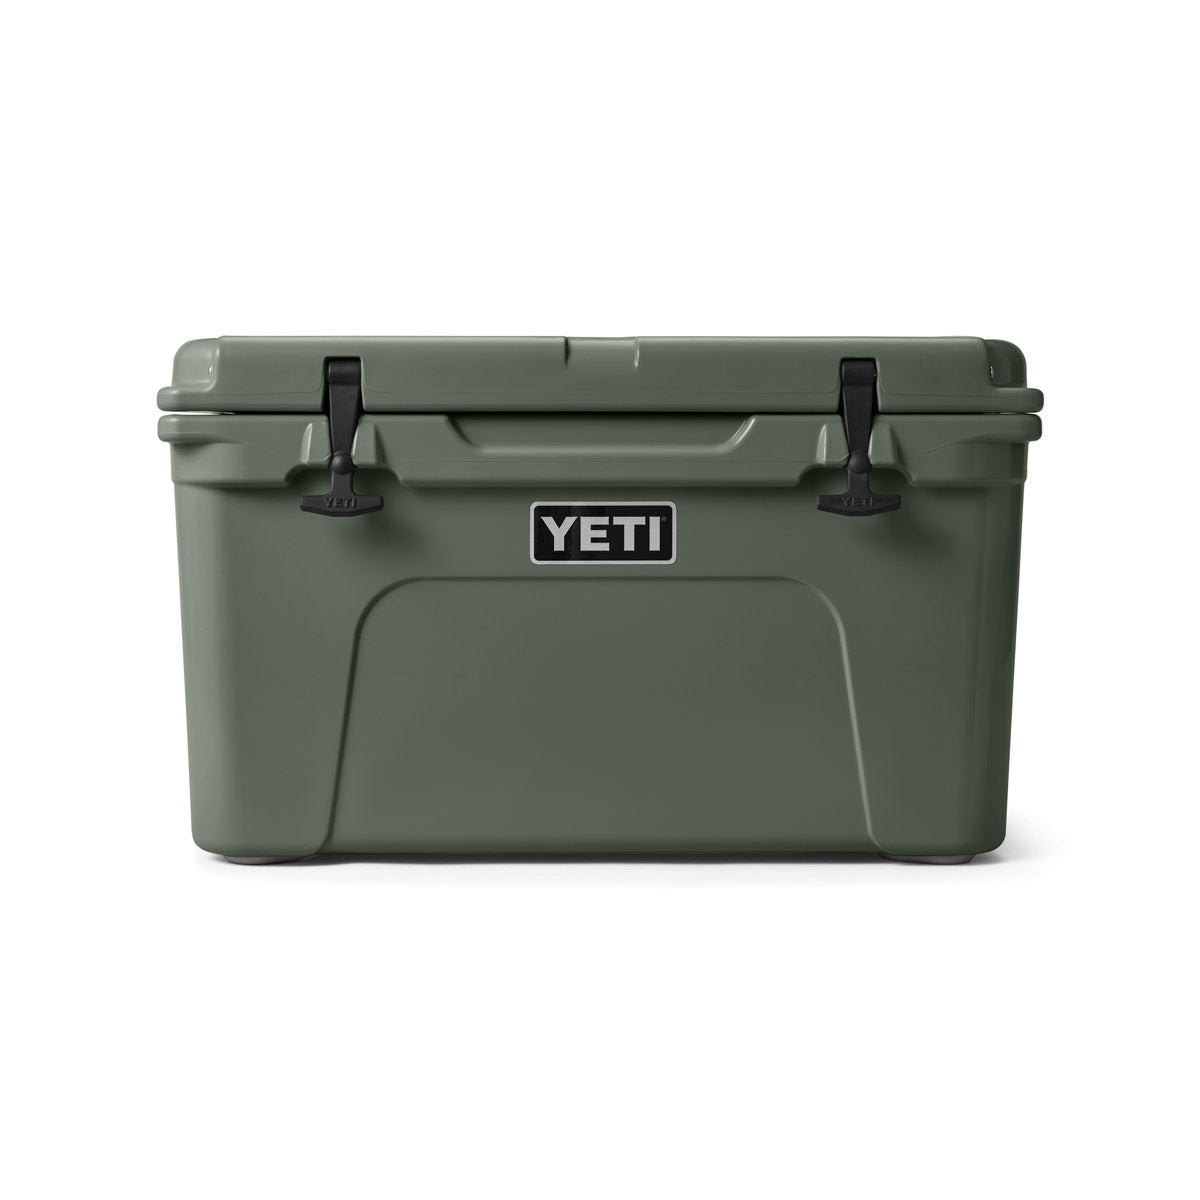 Rescue Red : r/YetiCoolers